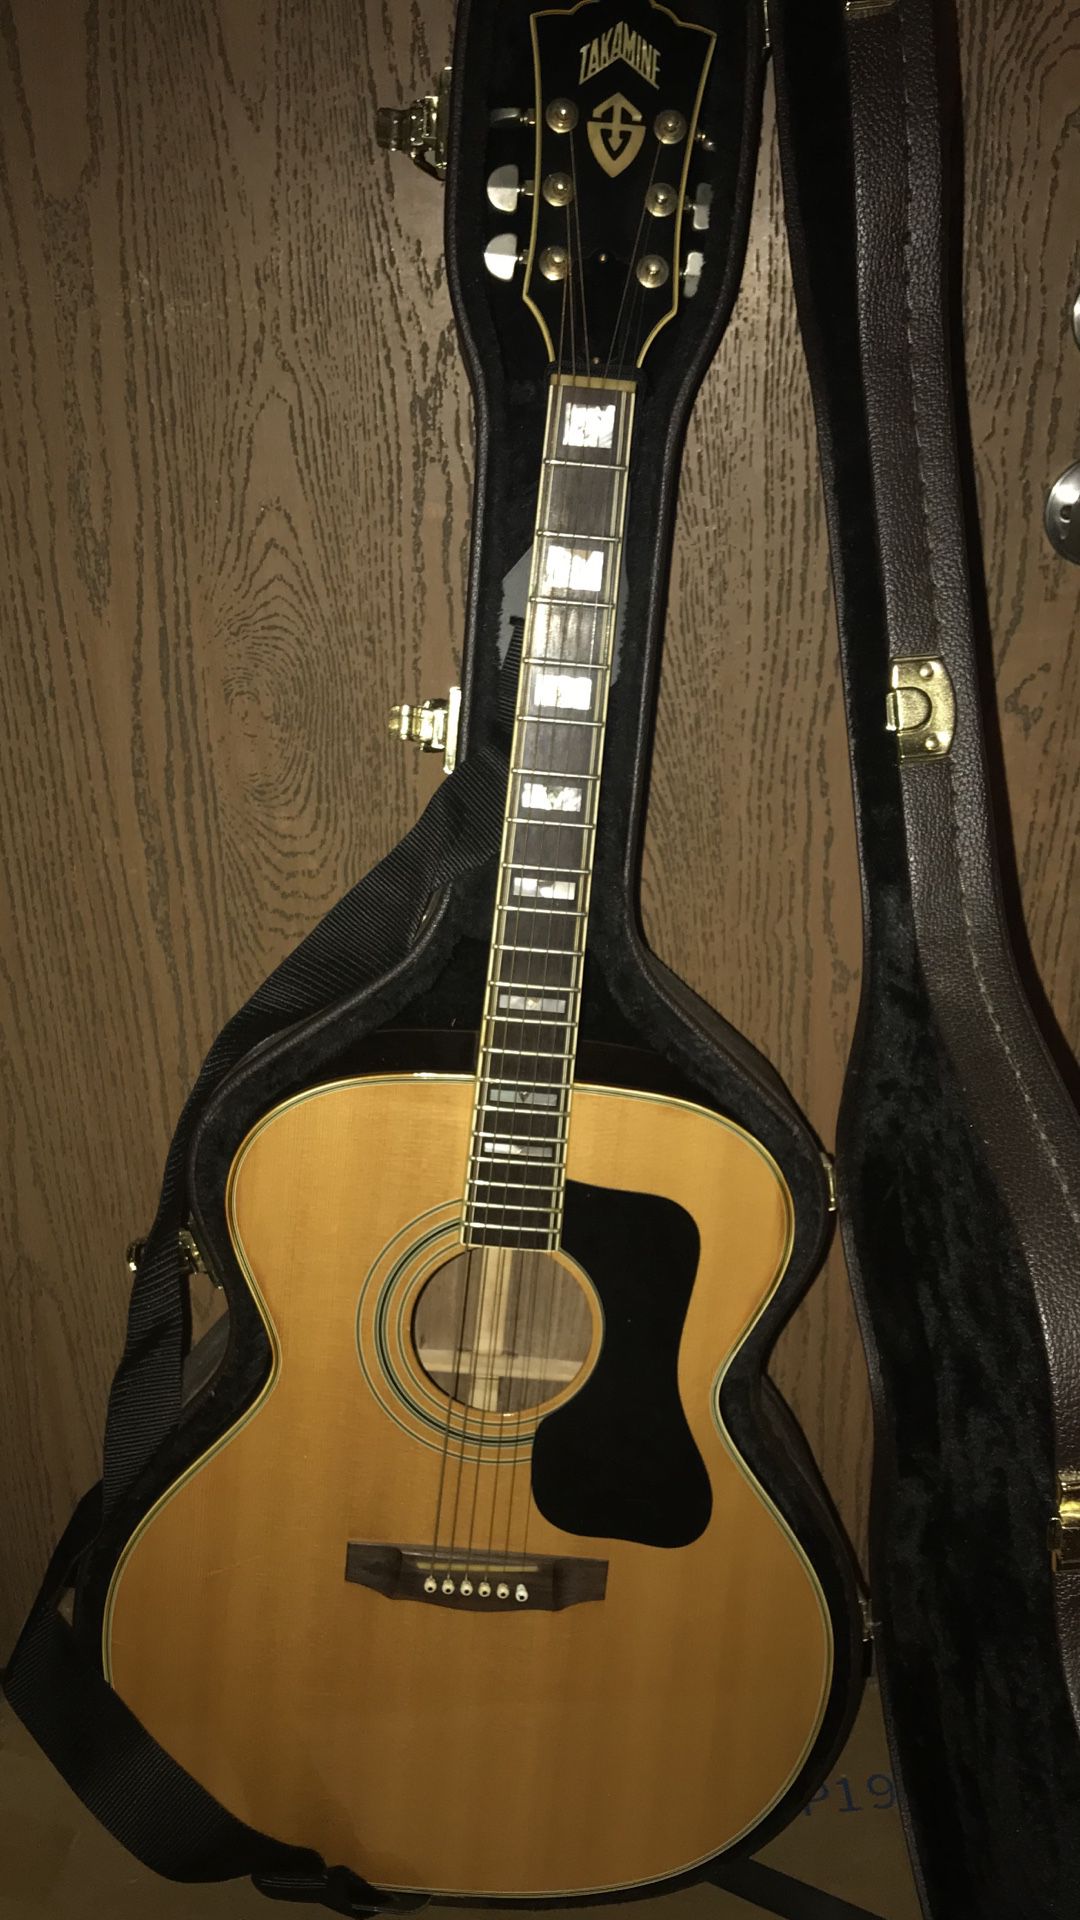 Beautiful  Takamine Guitar Mother Of Pearl Fretz Beautiful Guitar Must See No Scratches Or Nothing